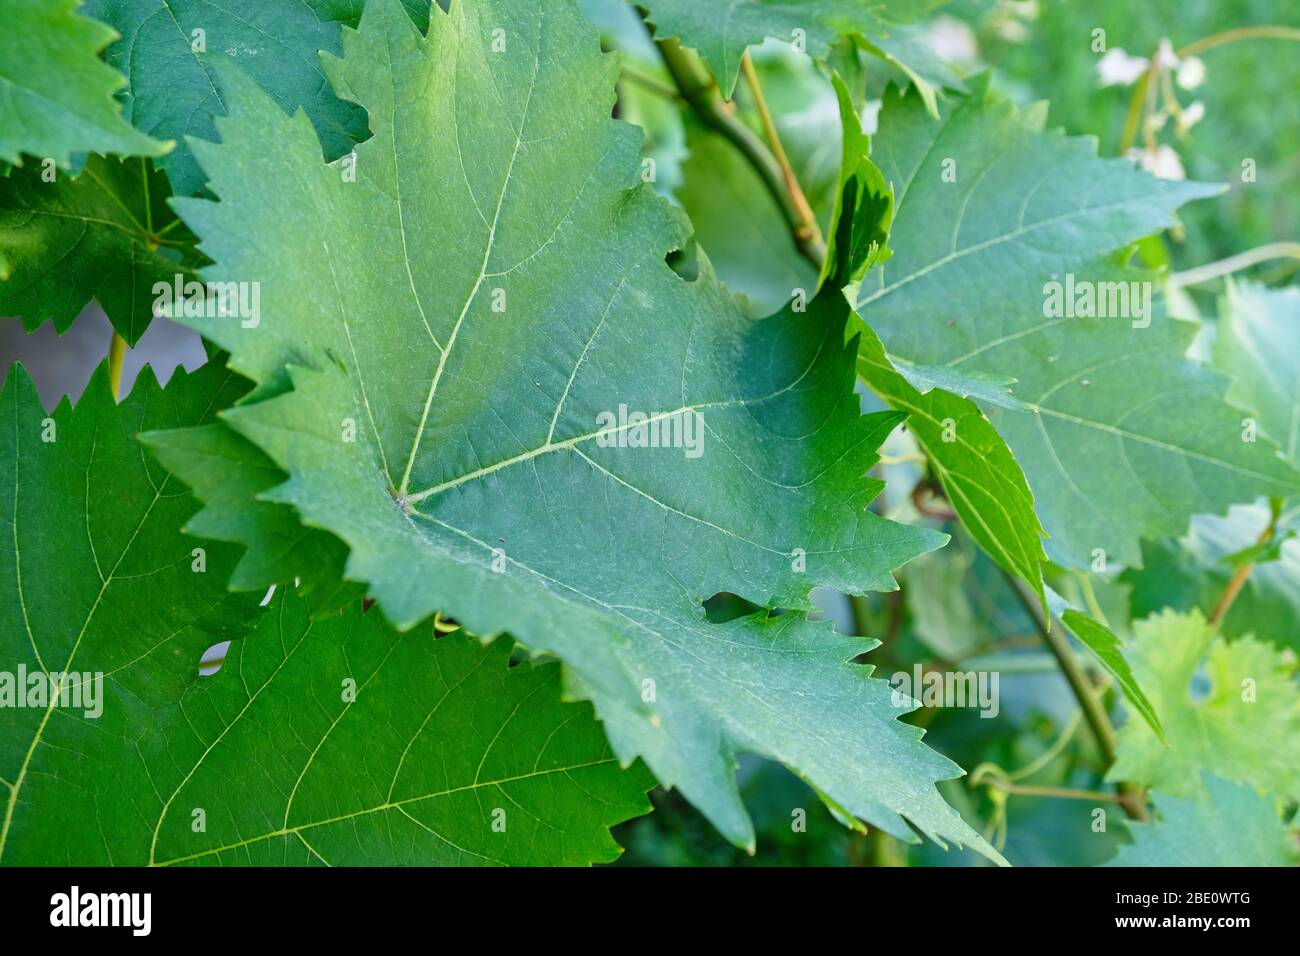 Grape vine leaves in closeup showing the veins Stock Photo